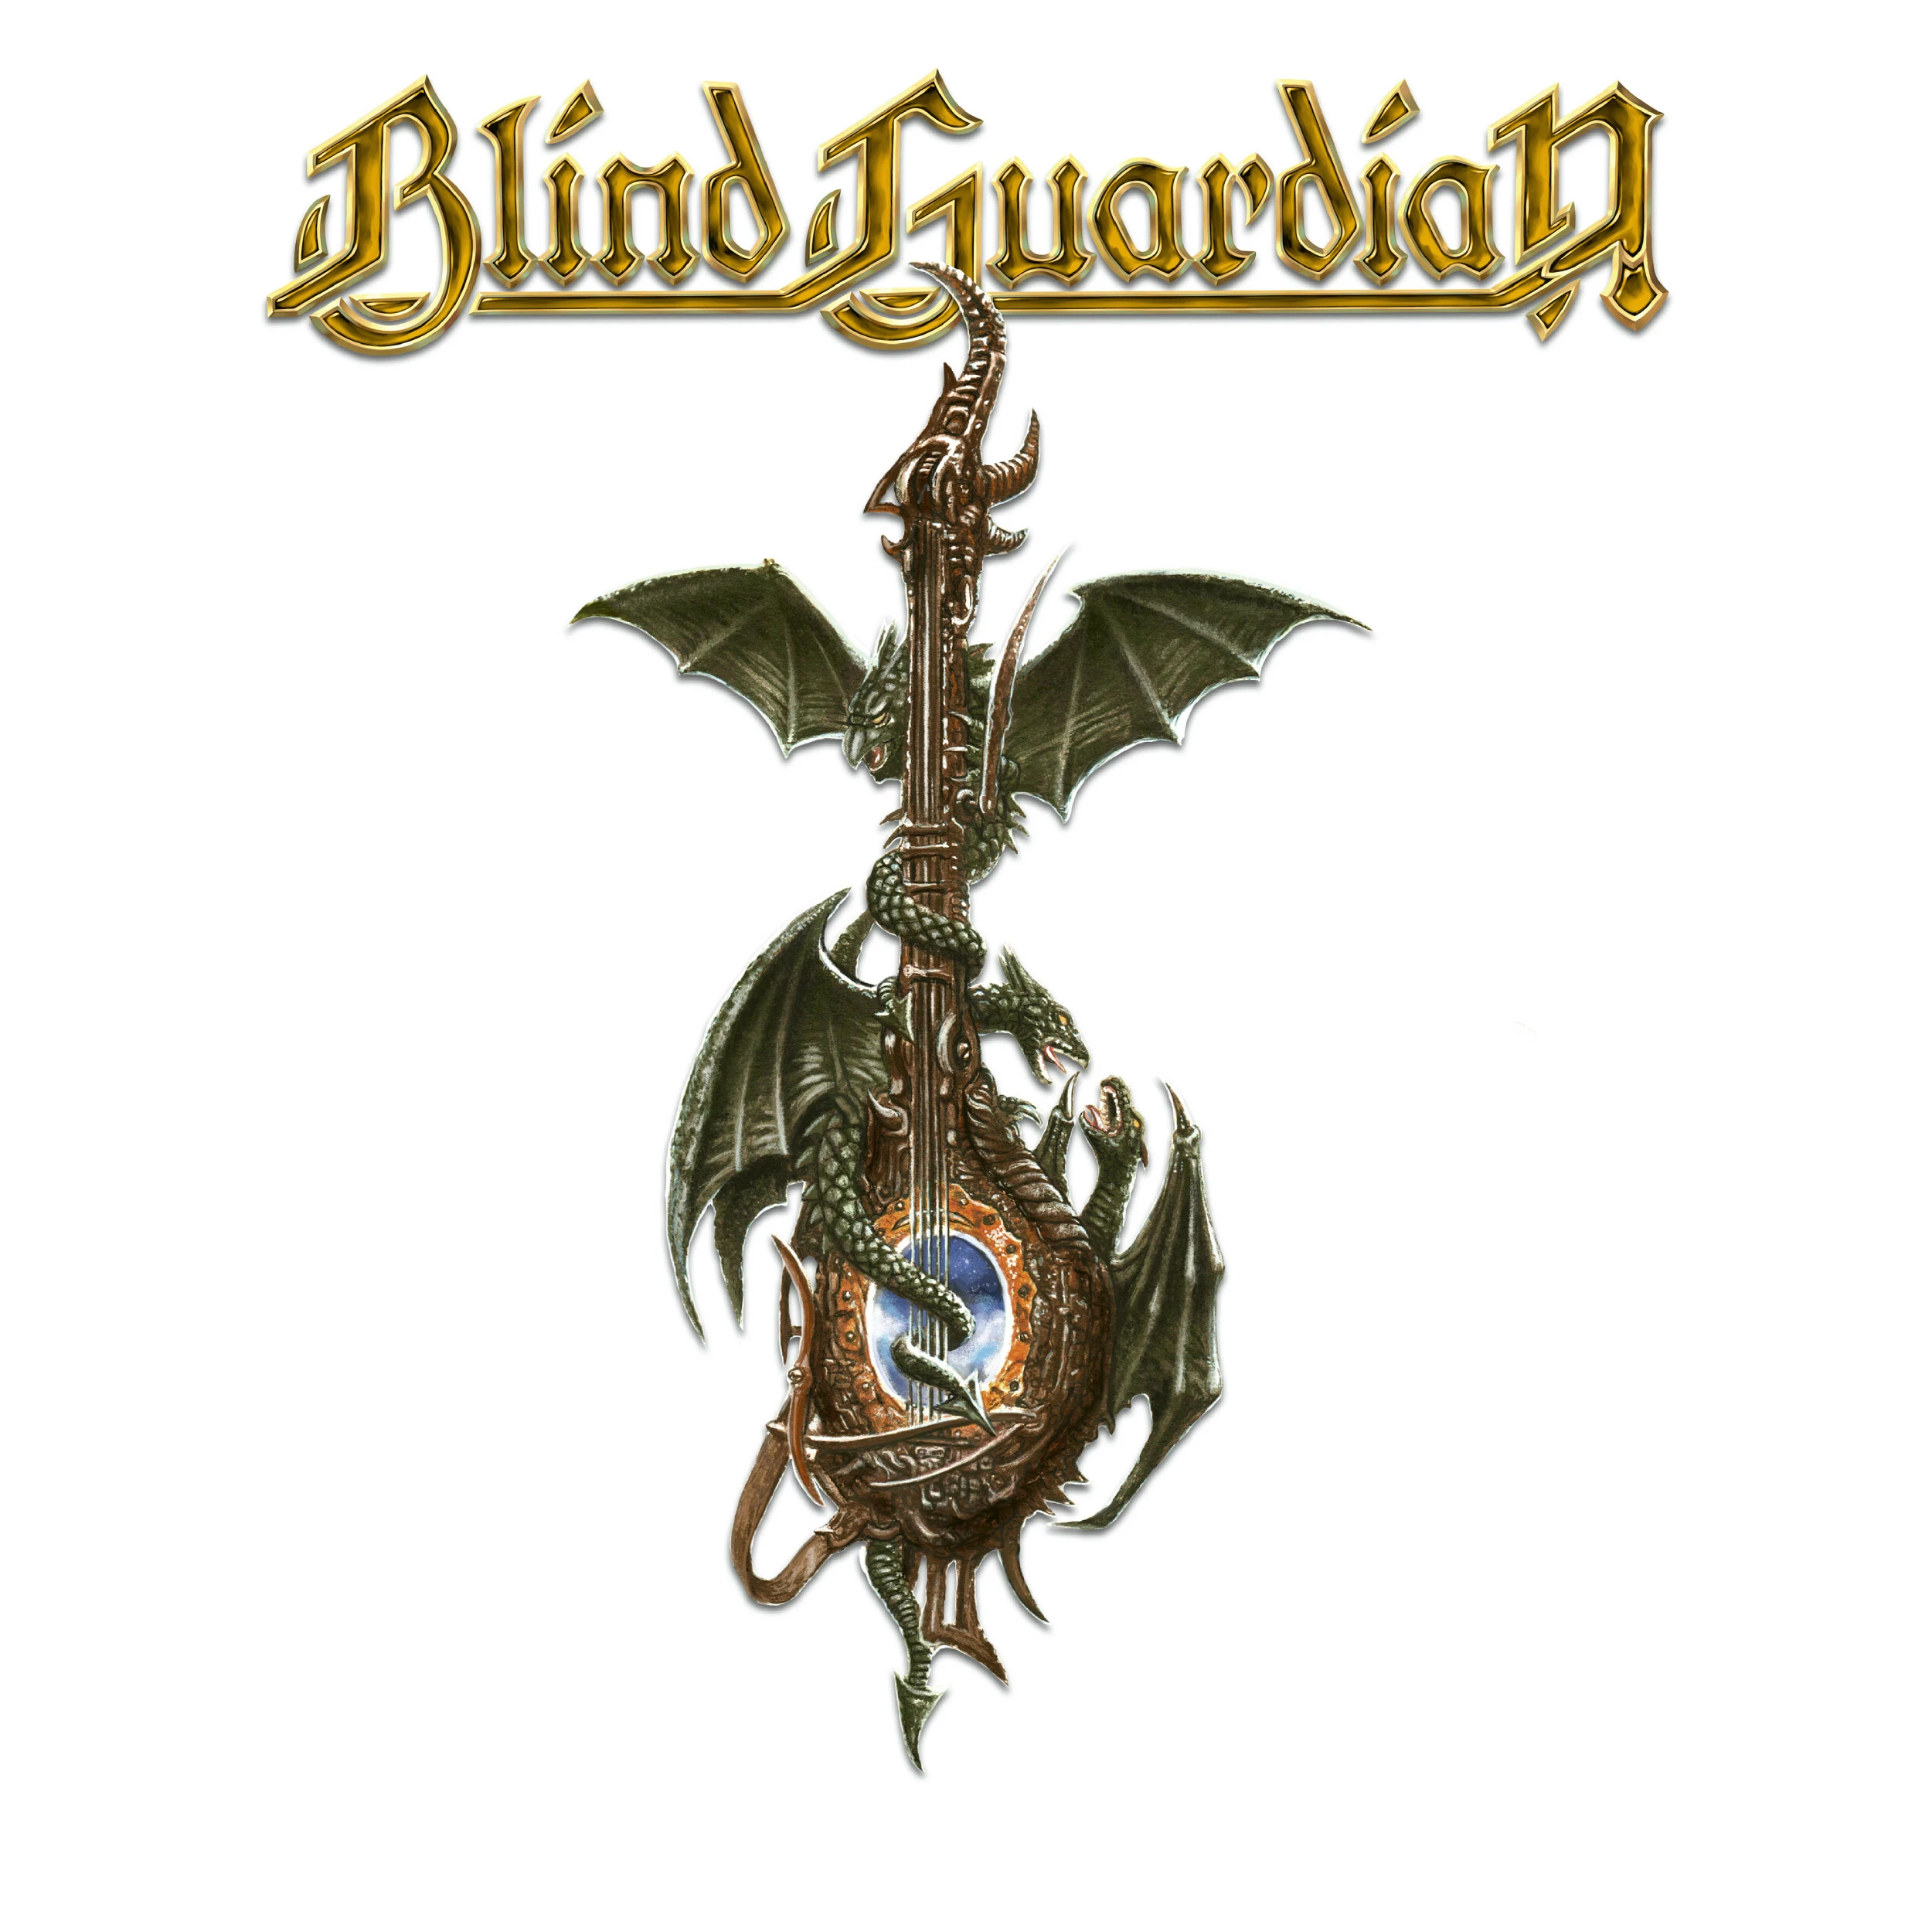 BLIND GUARDIAN - Imaginations From The Other Side [BLACK DLP]